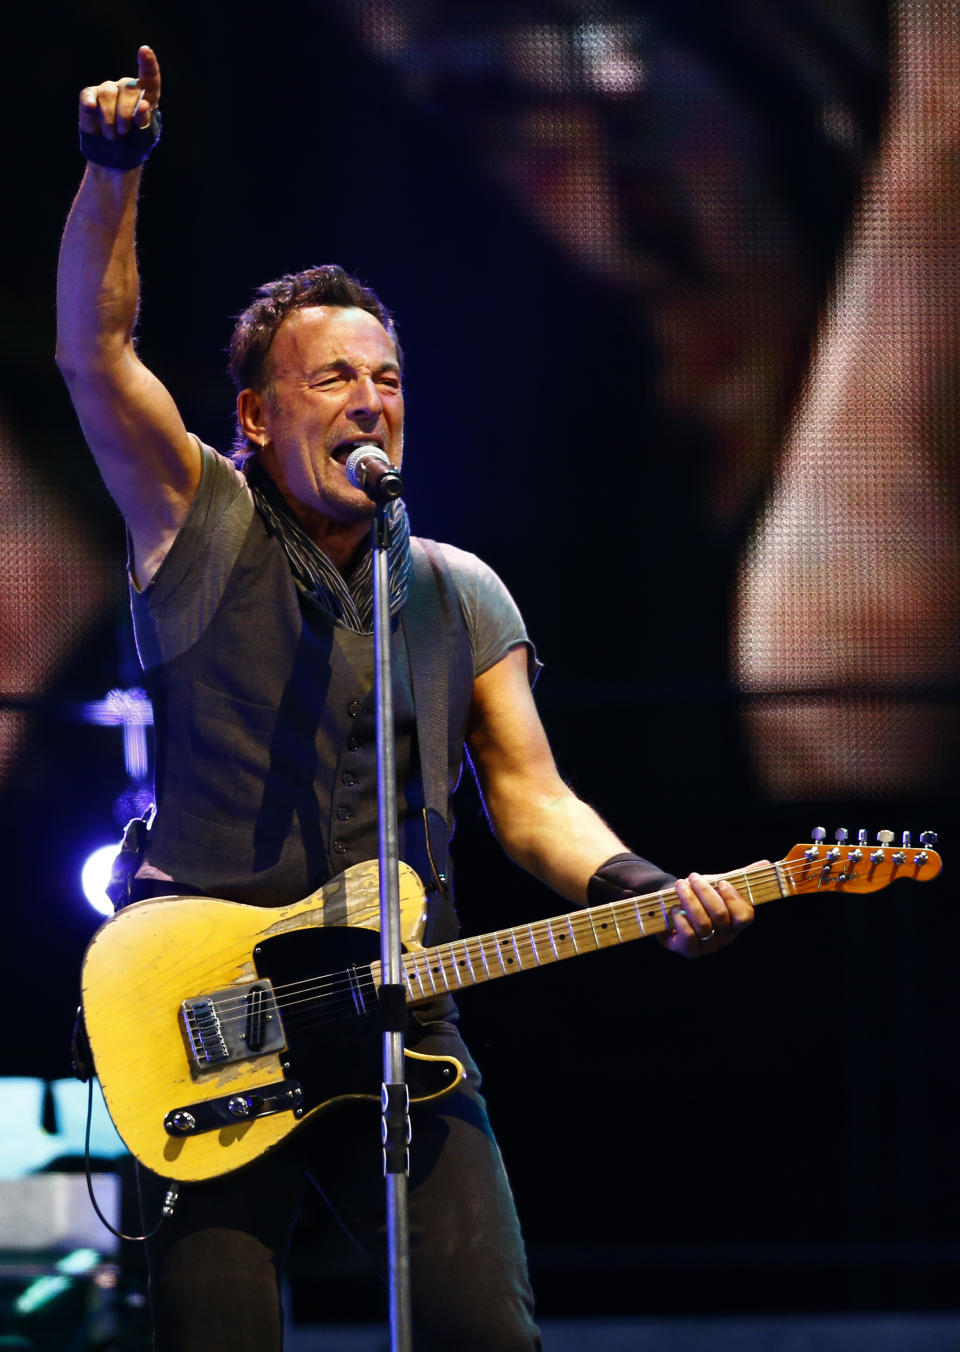 FILE - Bruce Springsteen and the E Street Band perform in Barcelona, Spain, on May 14, 2016. Springsteen's latest album, "Letter To You" will be released on Oct. 23. (AP Photo/Manu Fernandez, File)